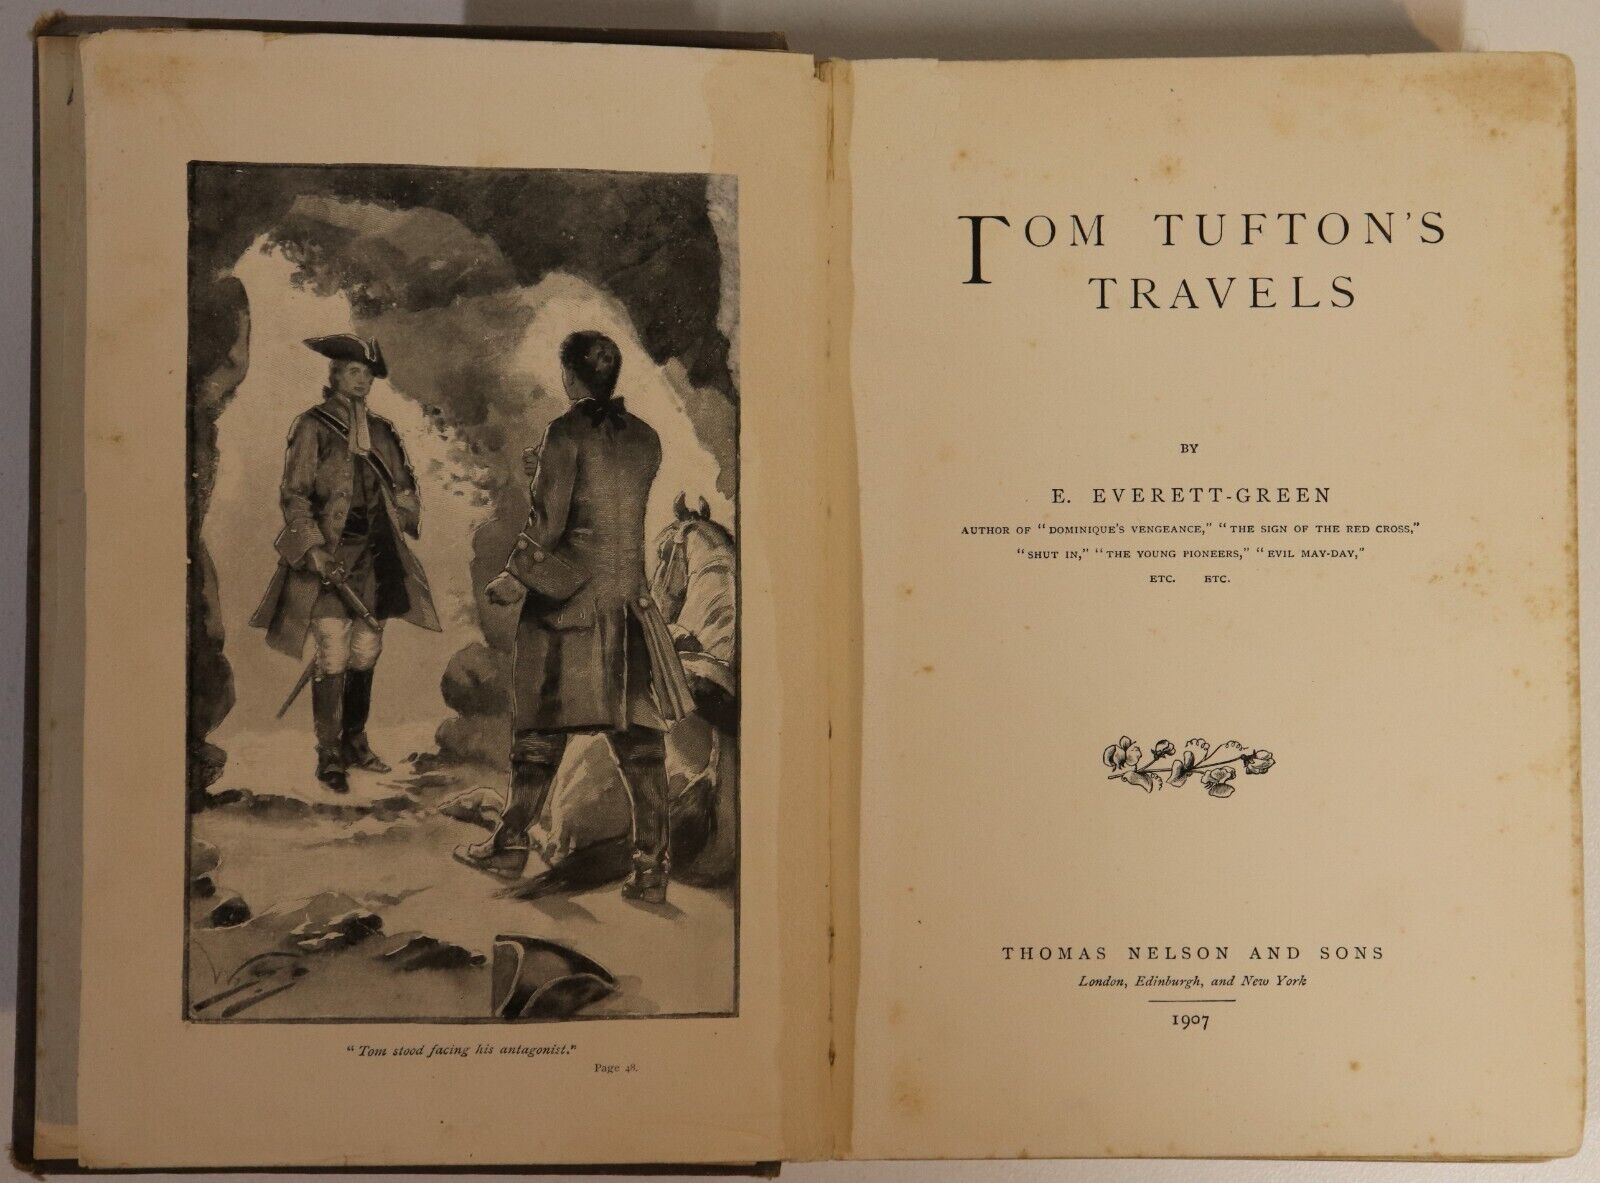 Tom Tufton's Travels by E. Everett-Green - 1907 - Antique Fiction Book